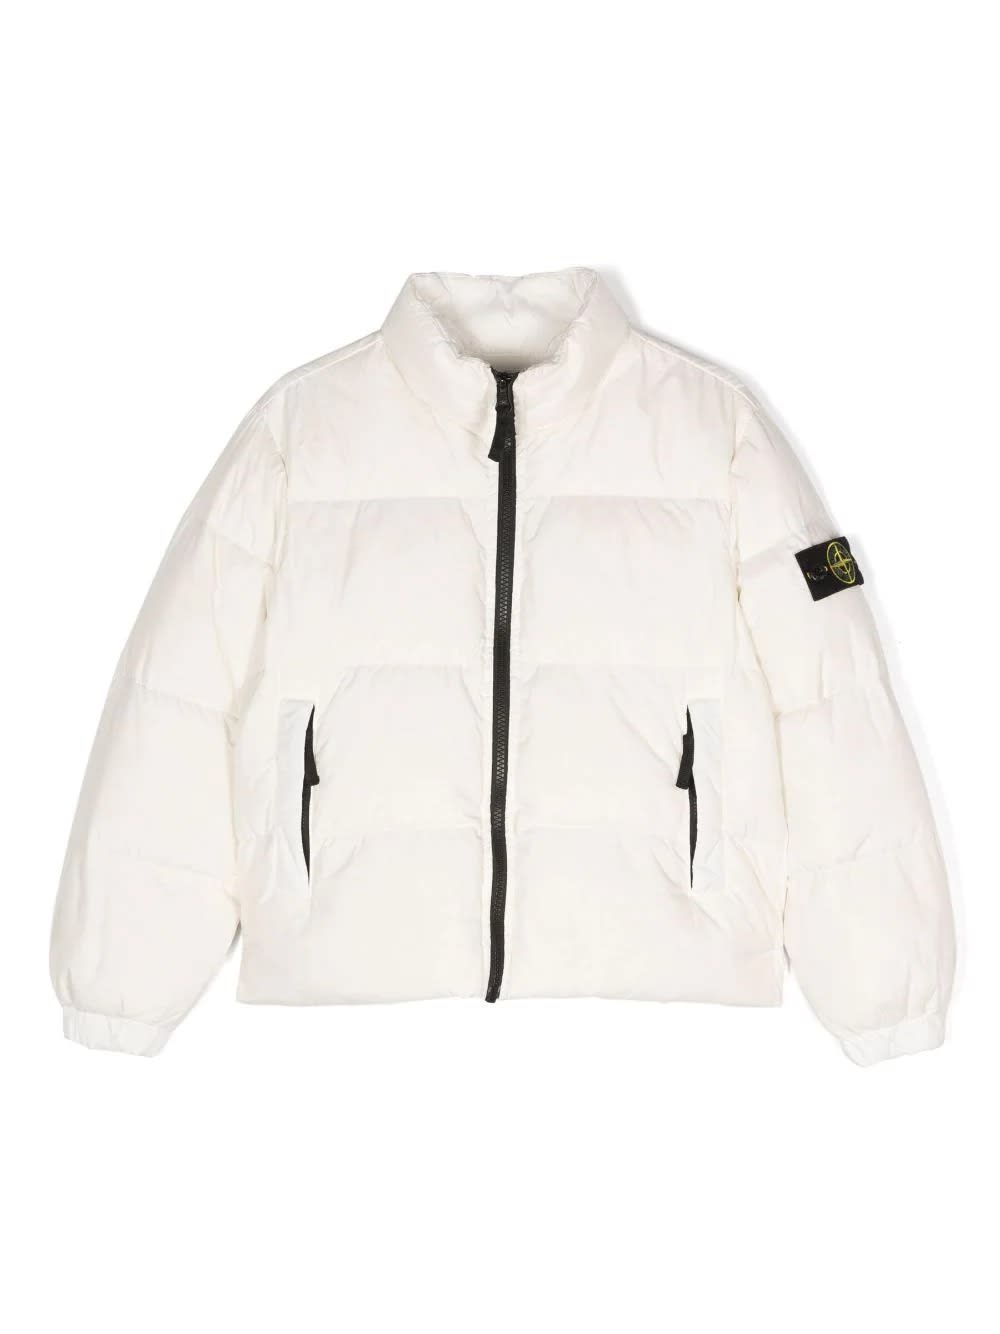 Stone Island Kids' White Dyed Crinkle Reps R-ny Down Jacket